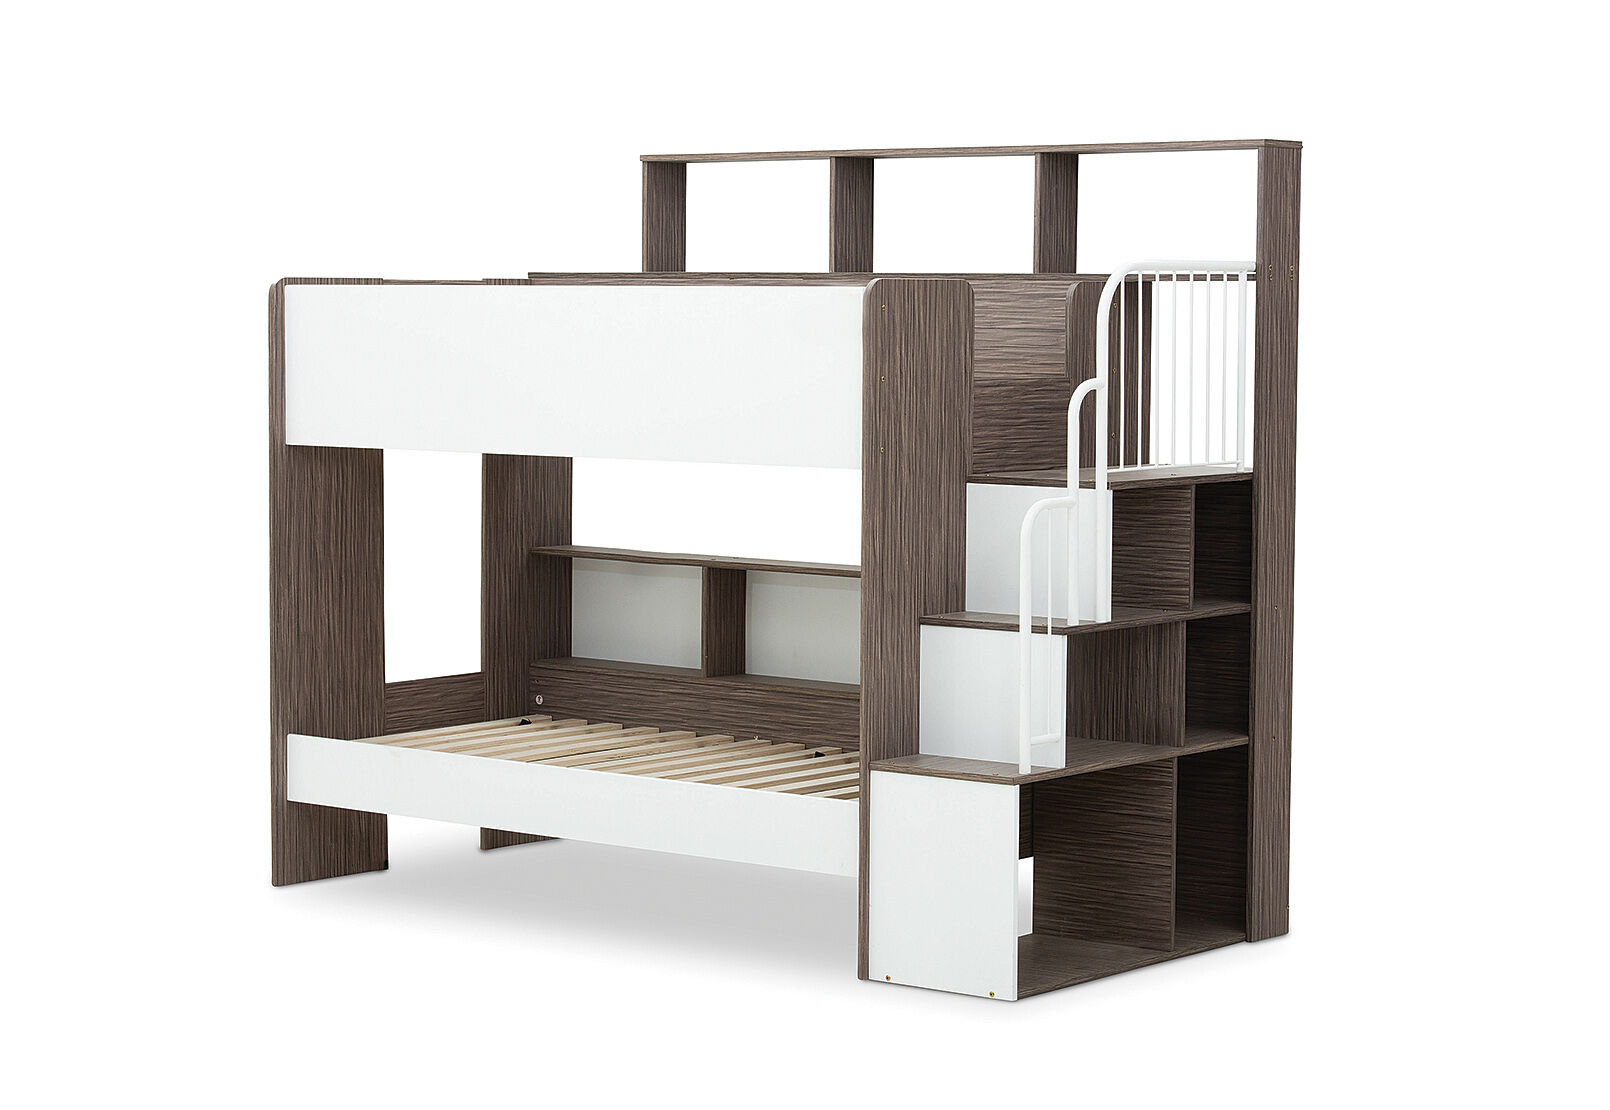 White Tango Jason Mk2 Double Bunk Bed, Jaysom Bunk Bed